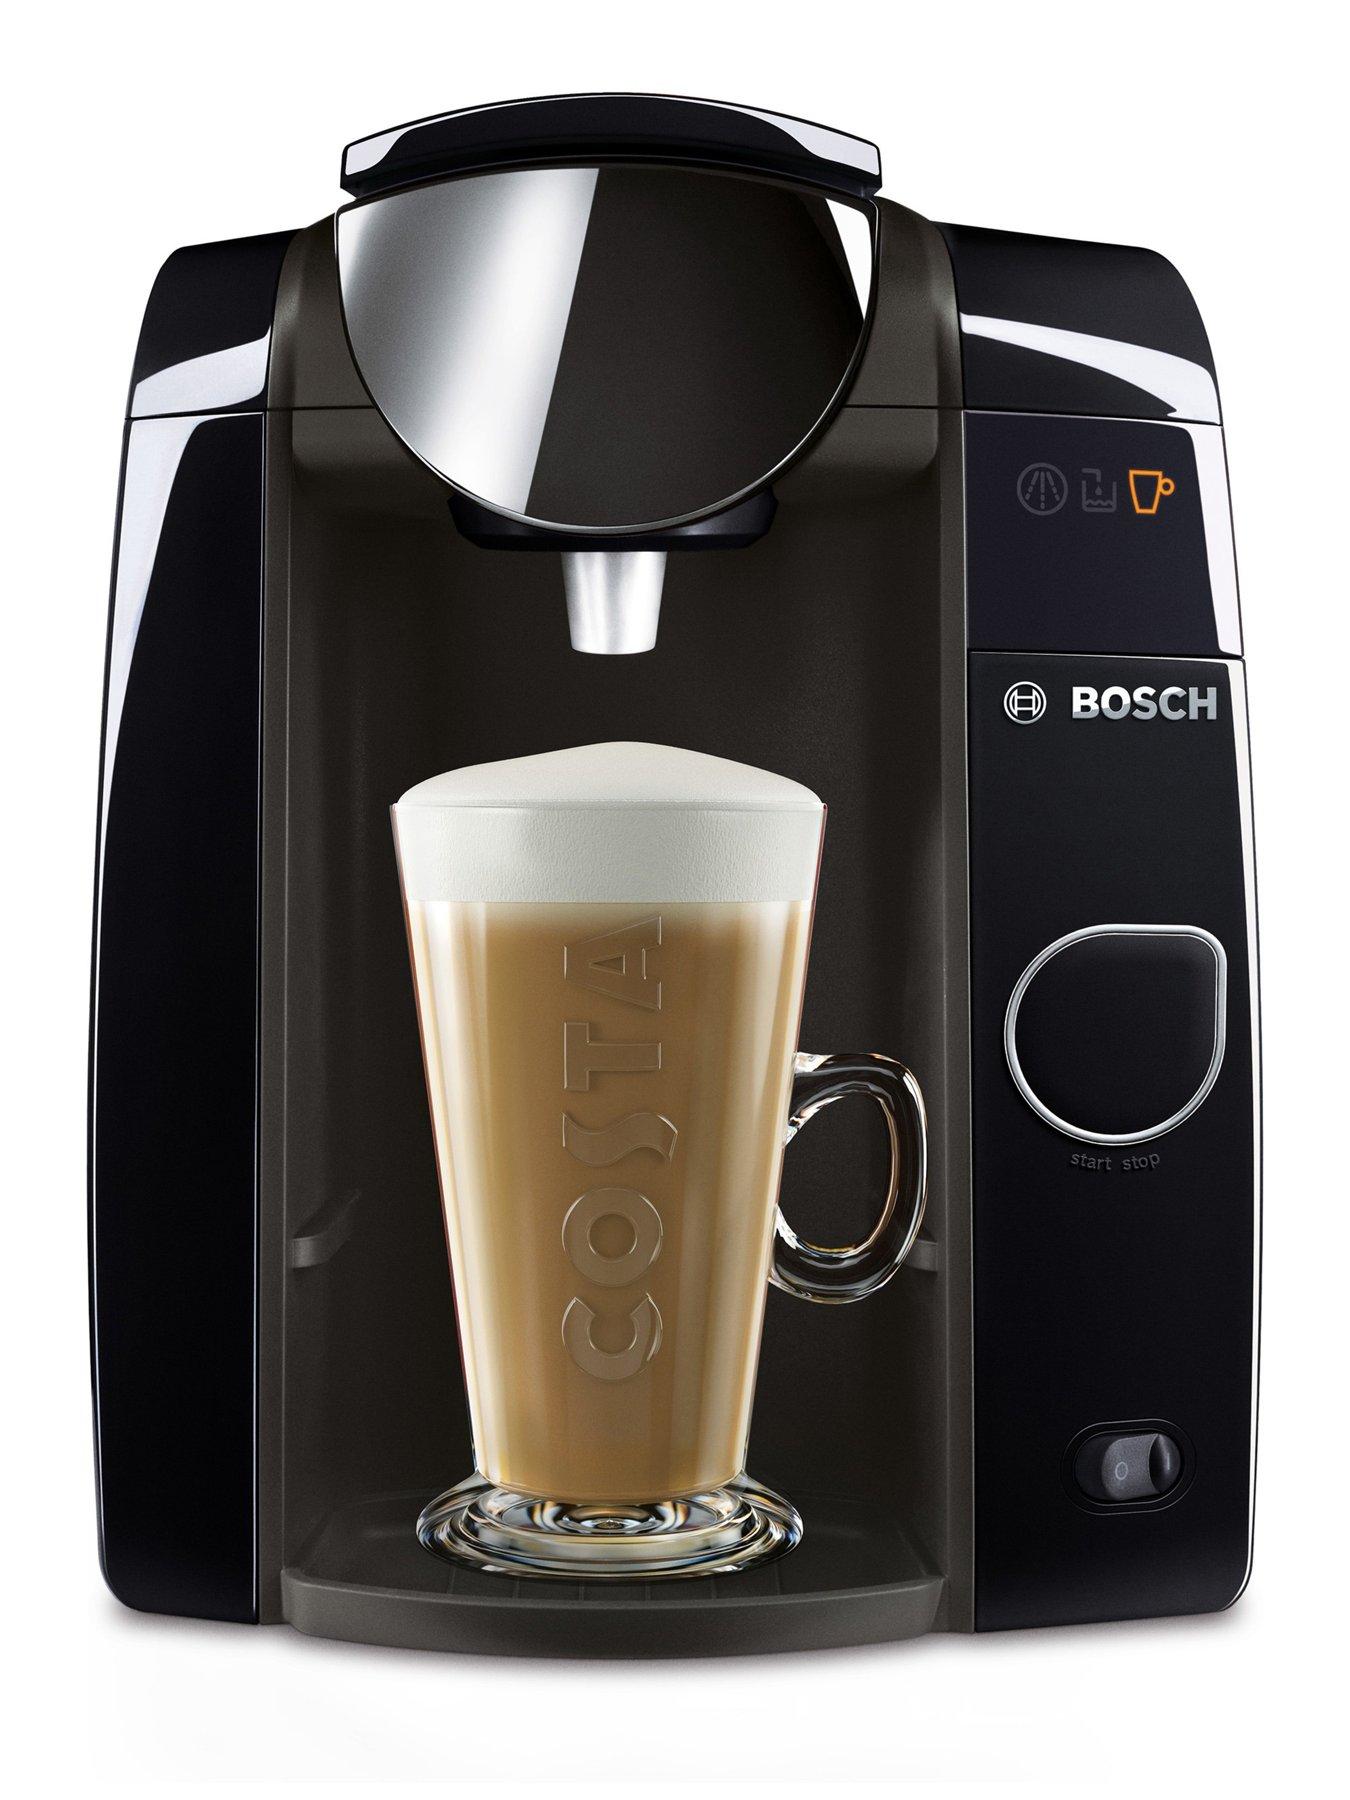 Calories in Tassimo Cappuccino by President's Choice and Nutrition